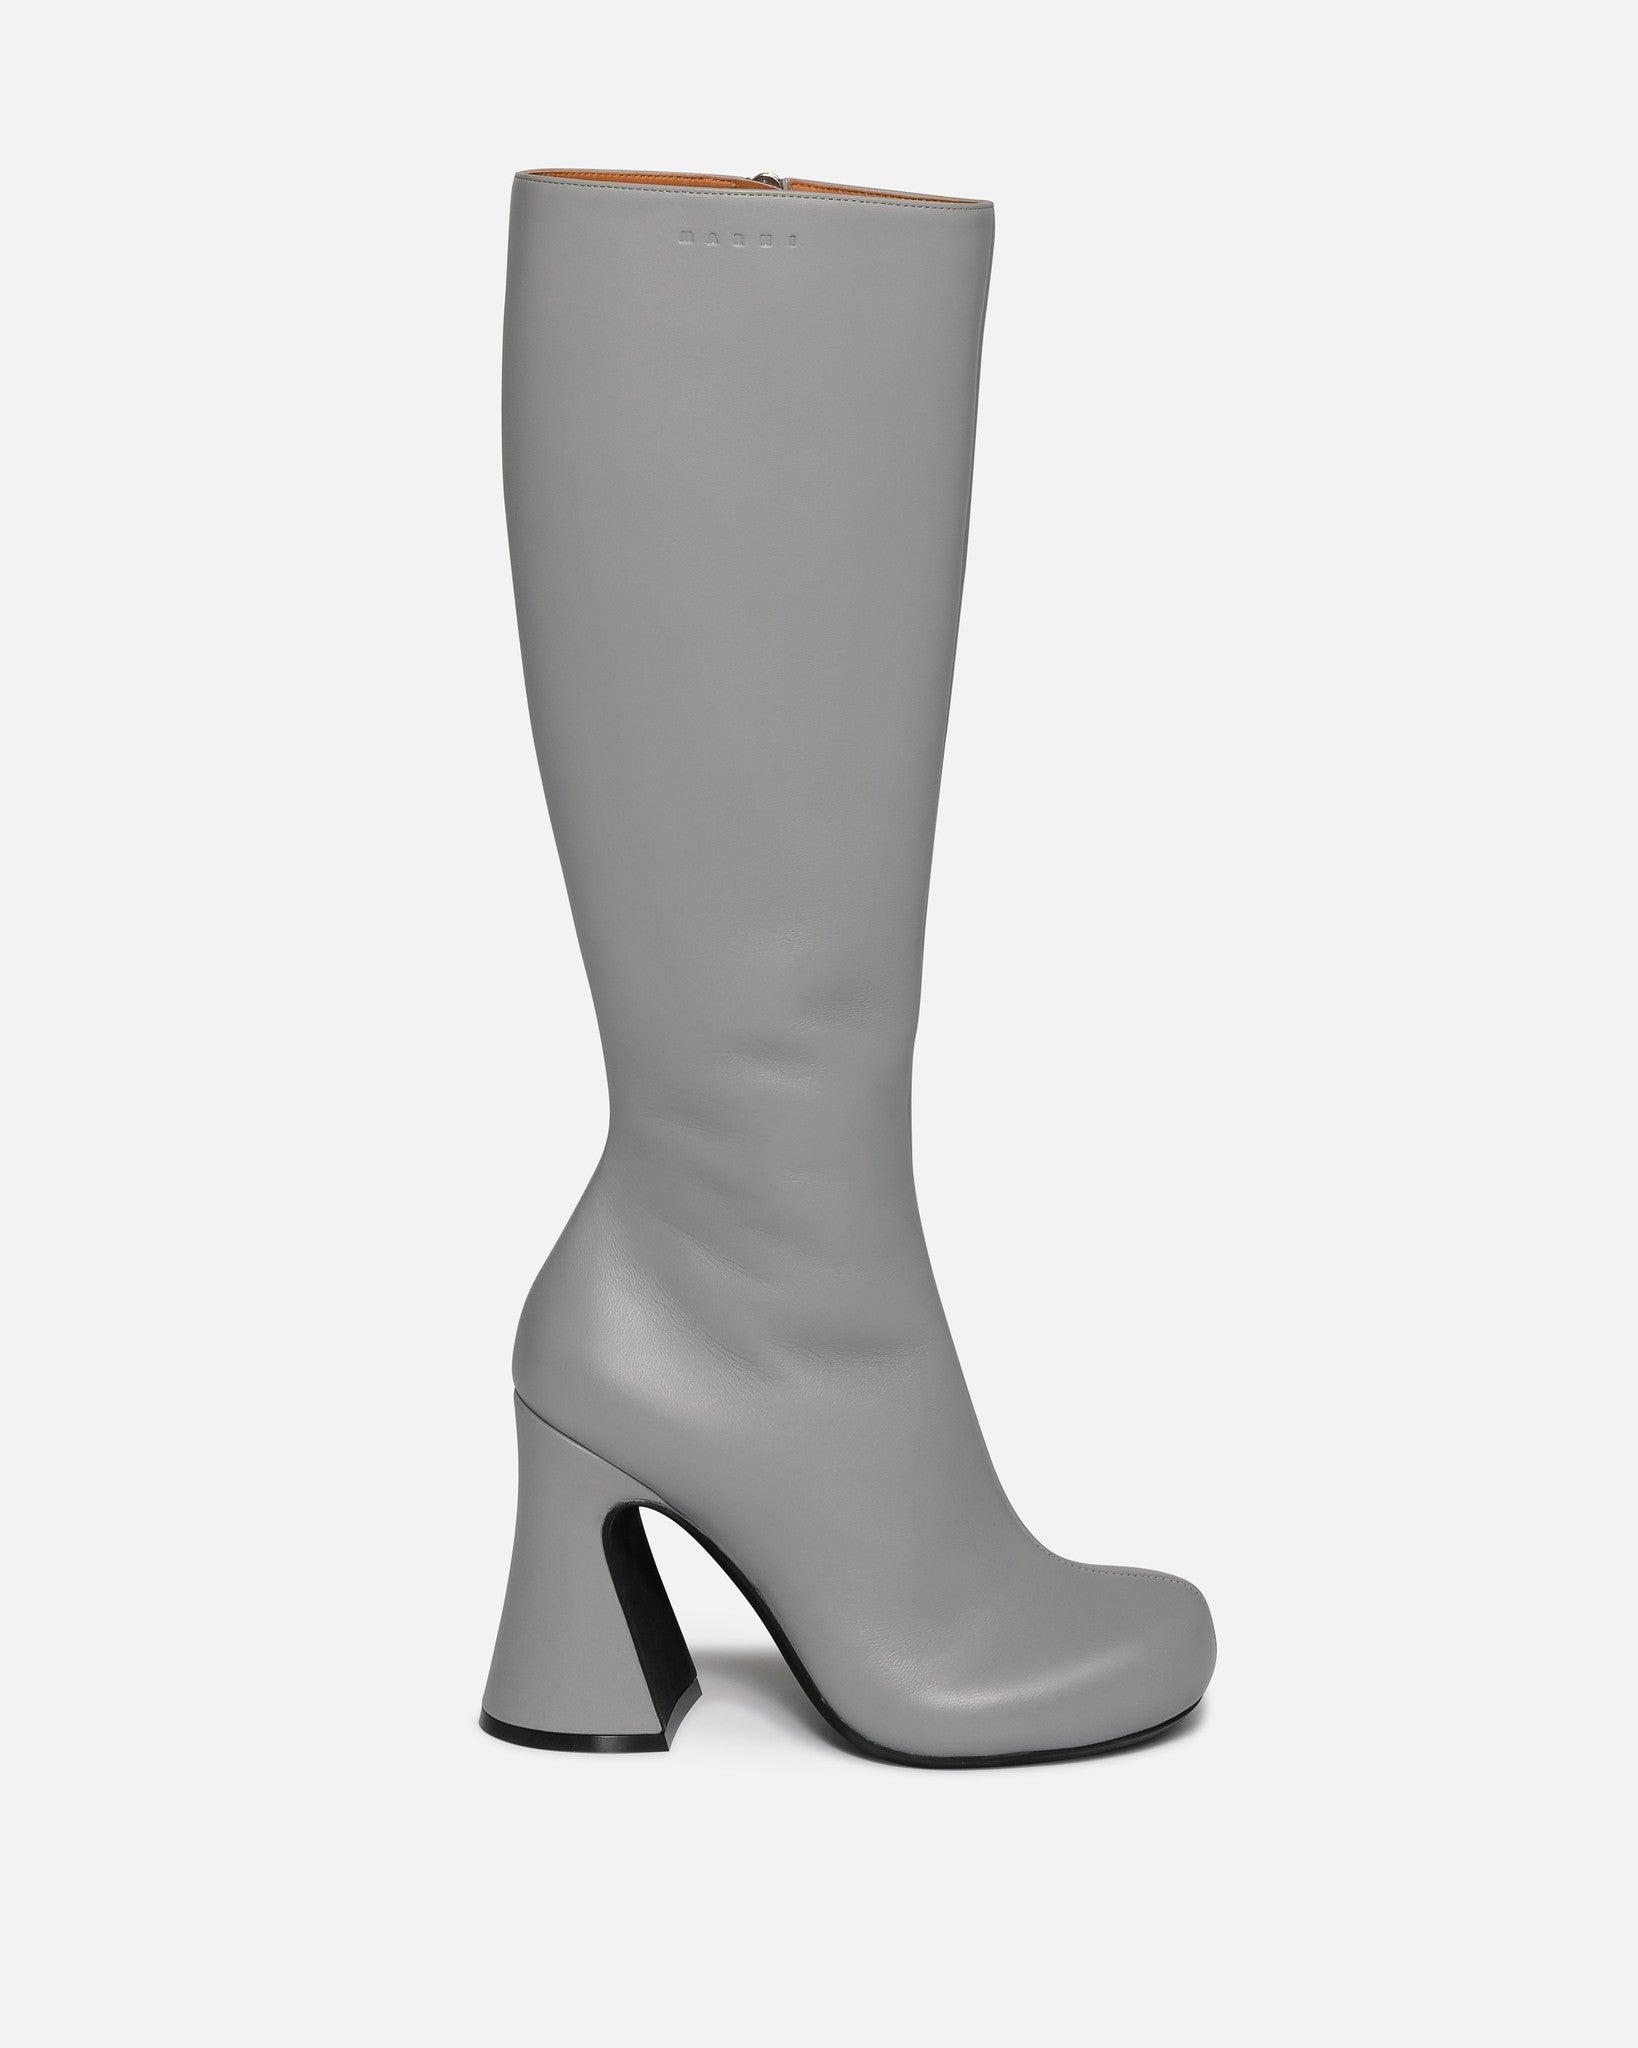 Marni Knee-high Leather Boots in Gray | Lyst